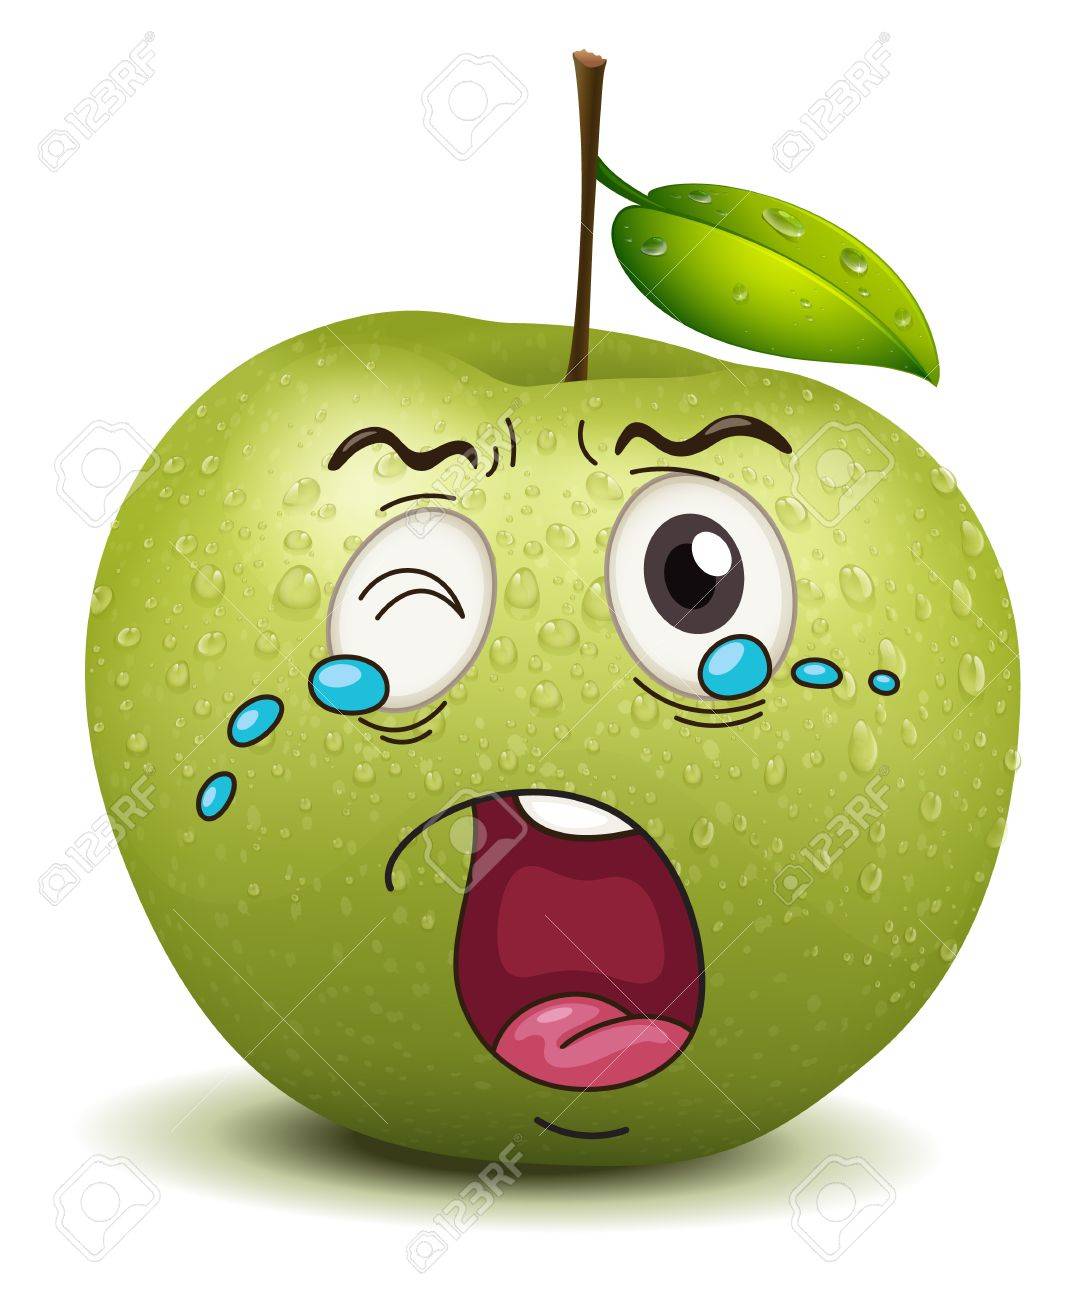 15337982-illustration-of-crying-apple-smiley-on-a-white-background-Stock-Vector.jpg